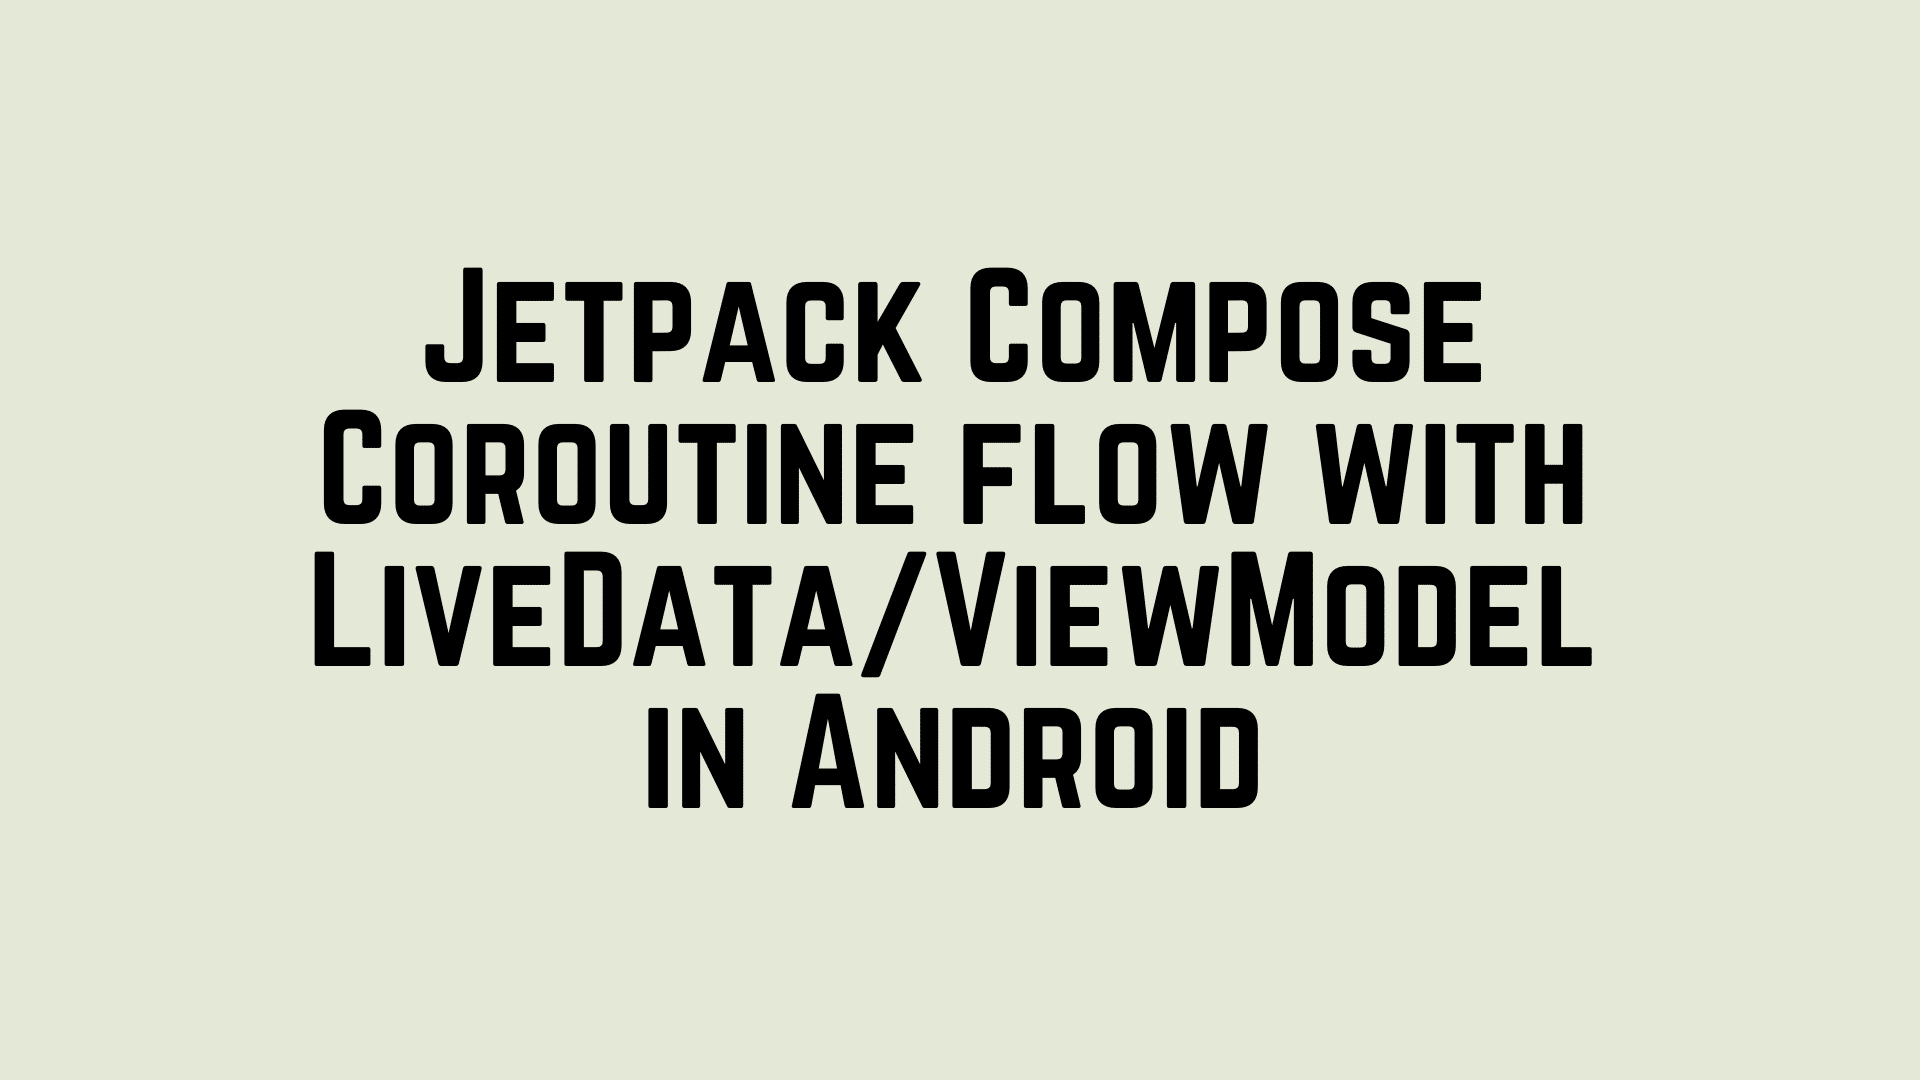 Jetpack Compose Coroutine flow with LiveData/ViewModel in Android